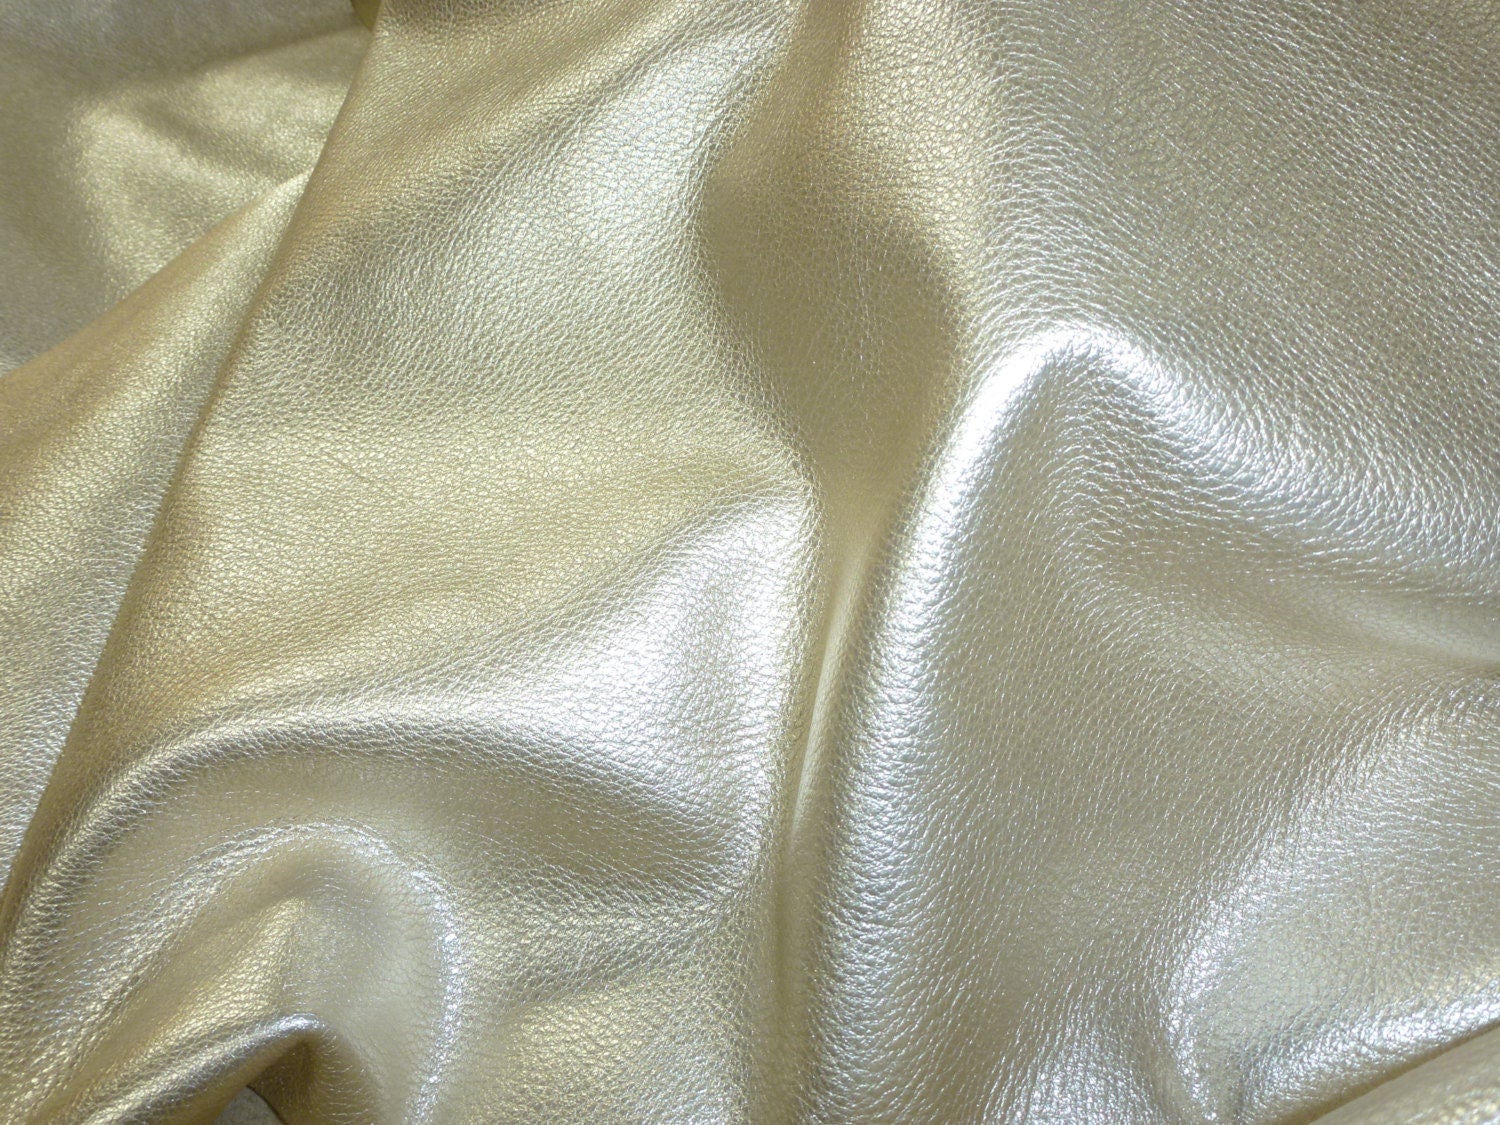 Pebbled Metallic Leather 3 Sq Ft Platinum Soft Cowhide Show The